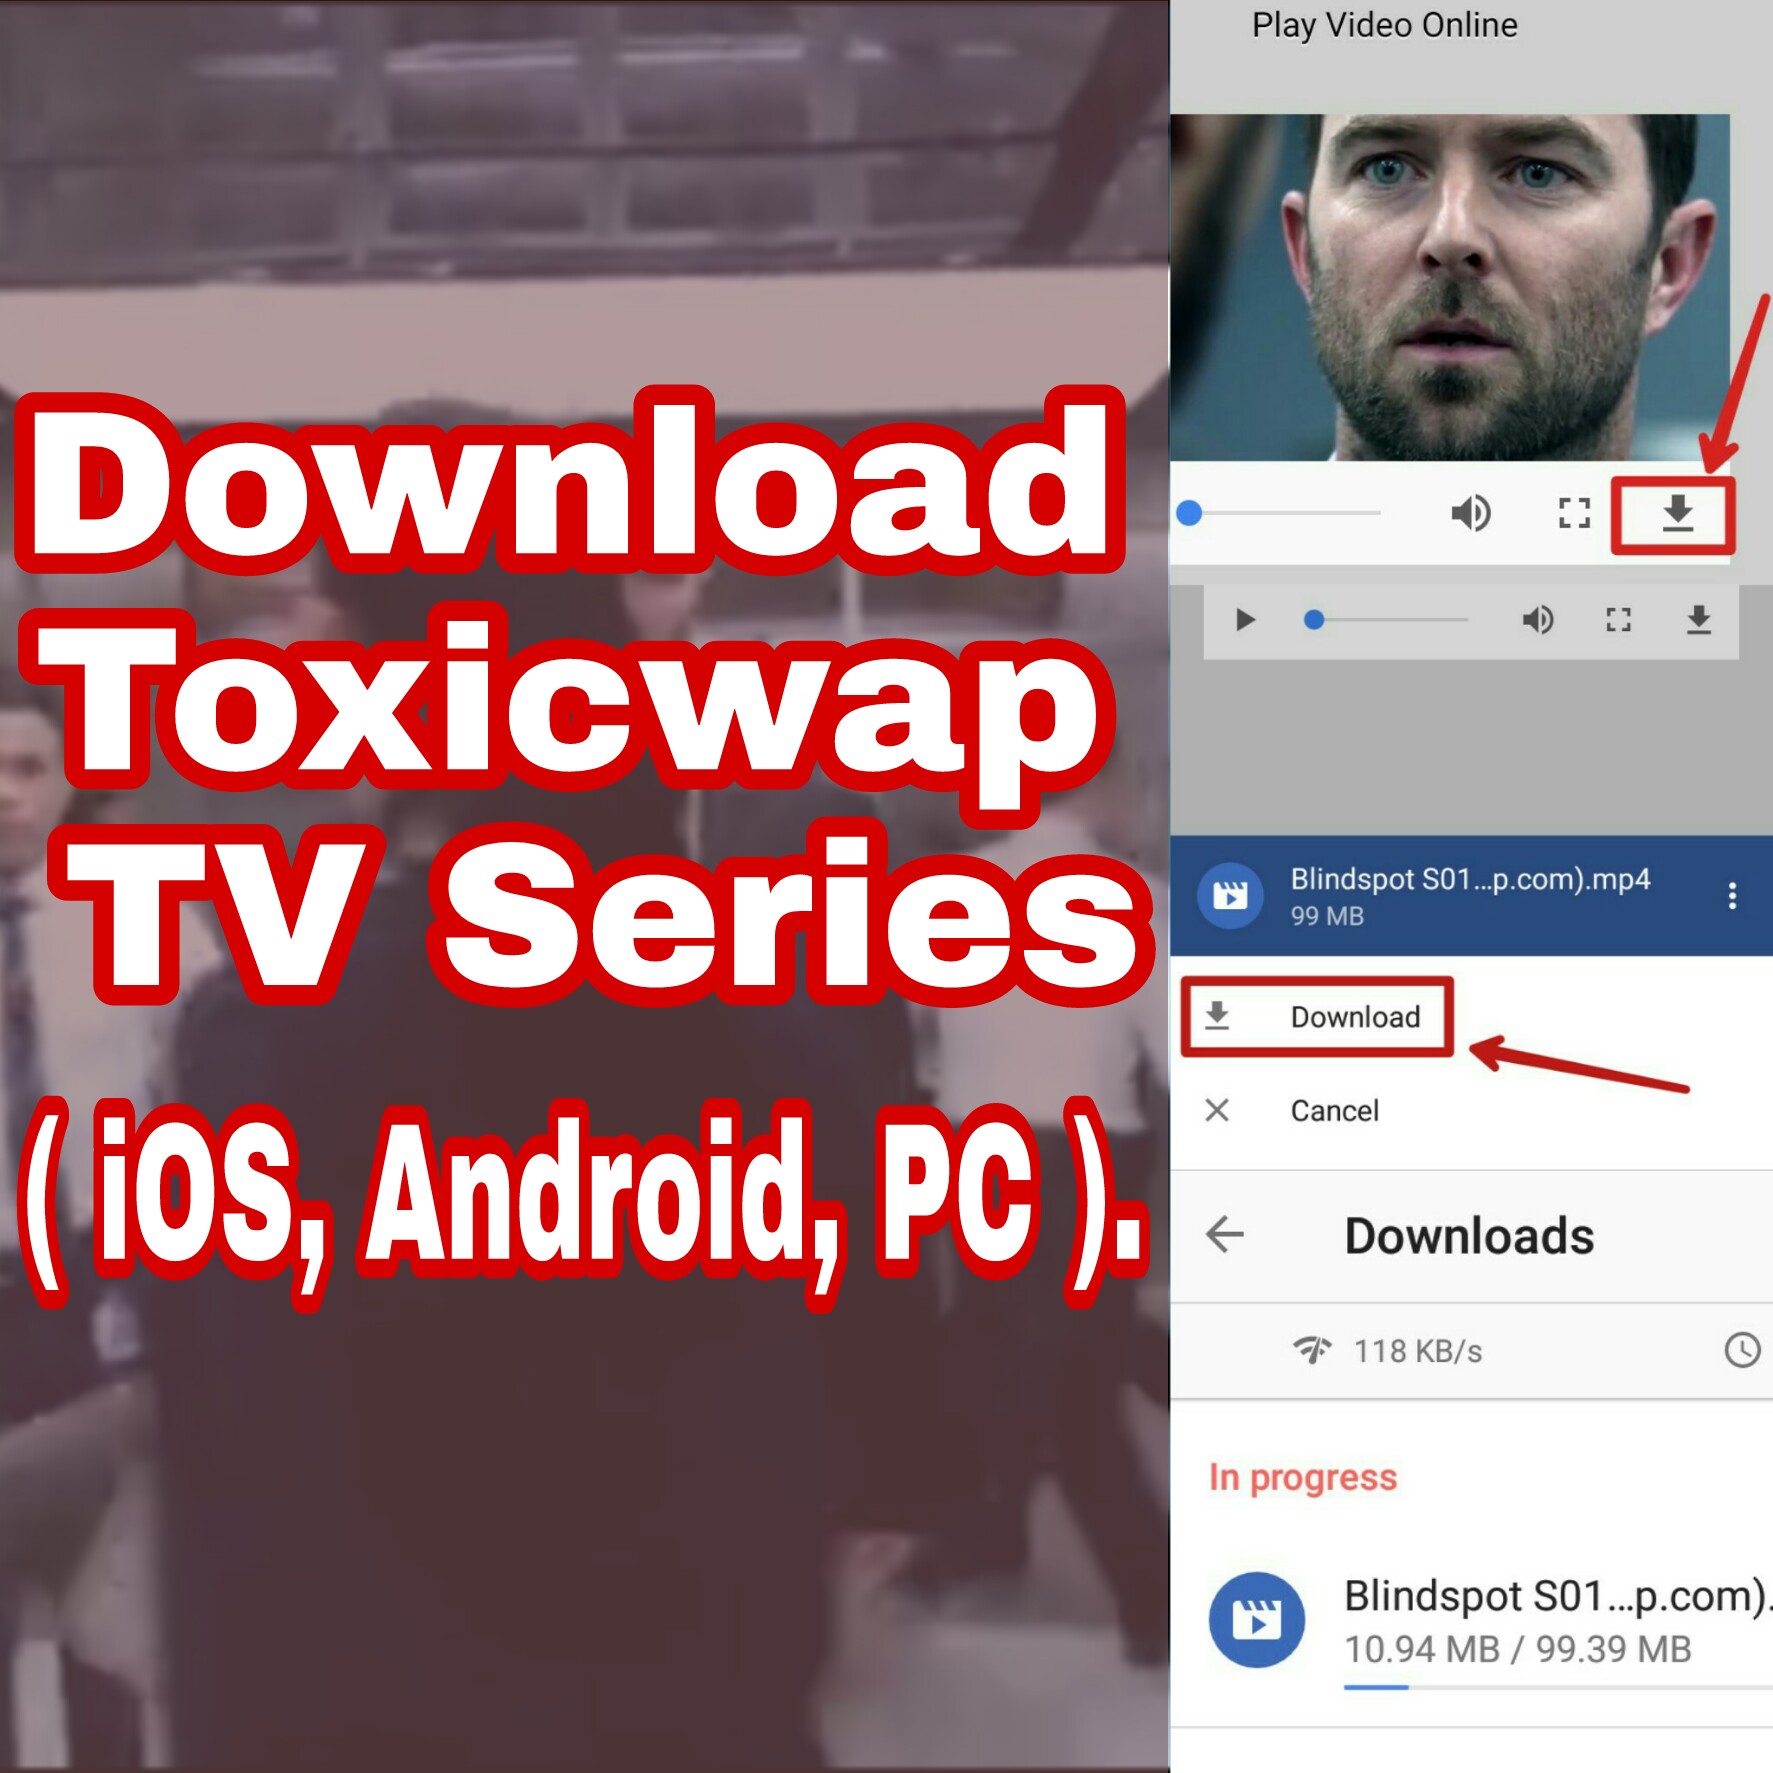 Toxicwap 2021 – Watch & Download HD Movies Online From Toxicwap.com, Toxicwap Free Movies and Series